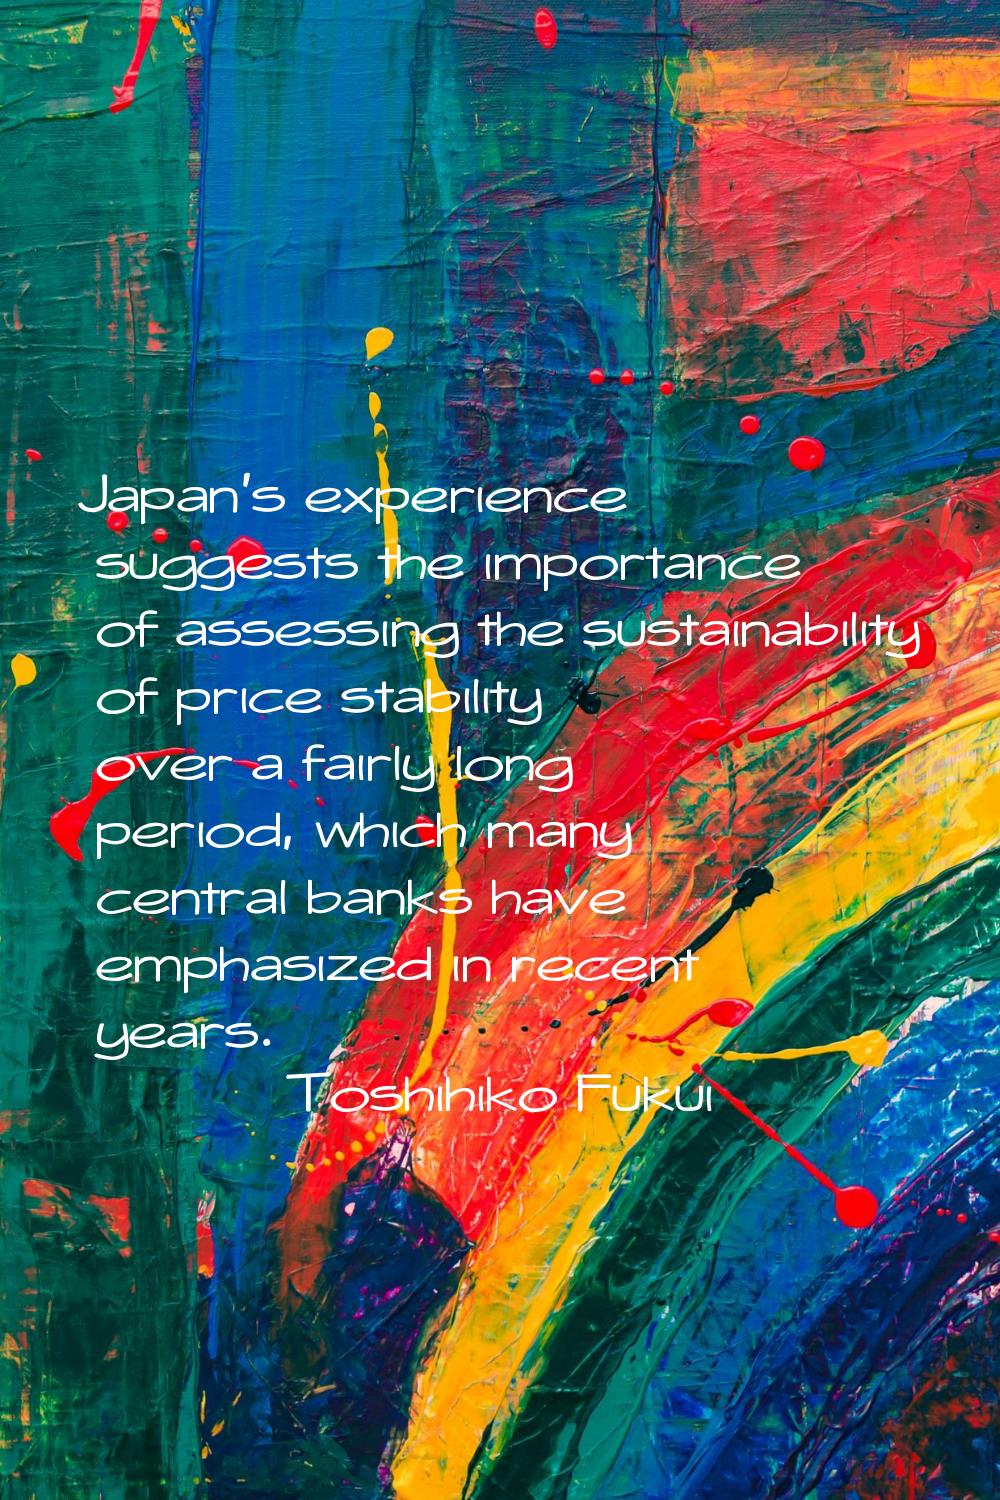 Japan's experience suggests the importance of assessing the sustainability of price stability over 